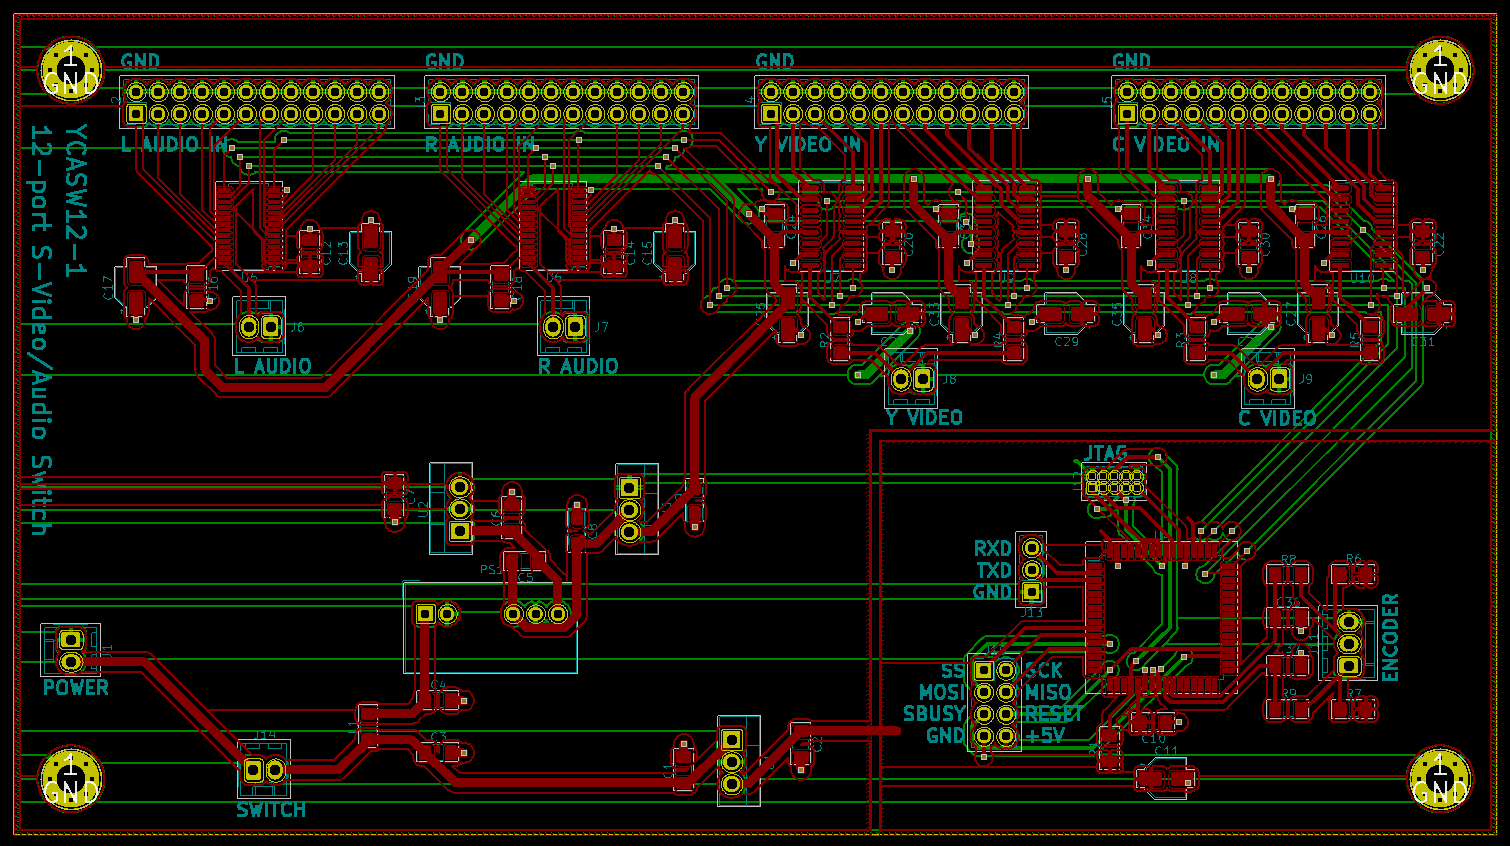 PCB layout for A/V switch